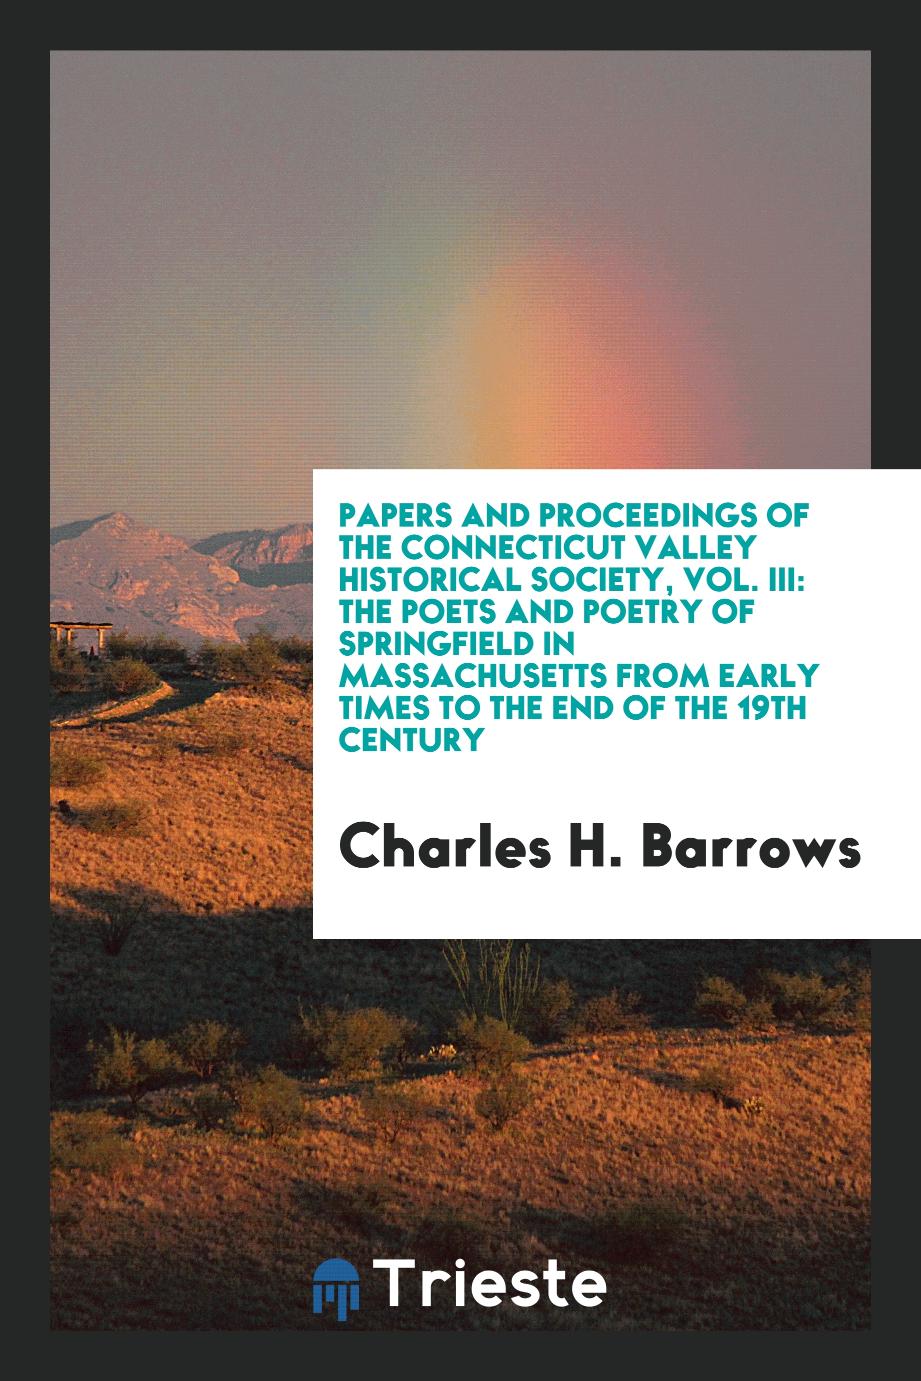 Papers and Proceedings of the Connecticut Valley Historical Society, Vol. III: The Poets and Poetry of Springfield in Massachusetts from Early Times to the End of the 19th Century